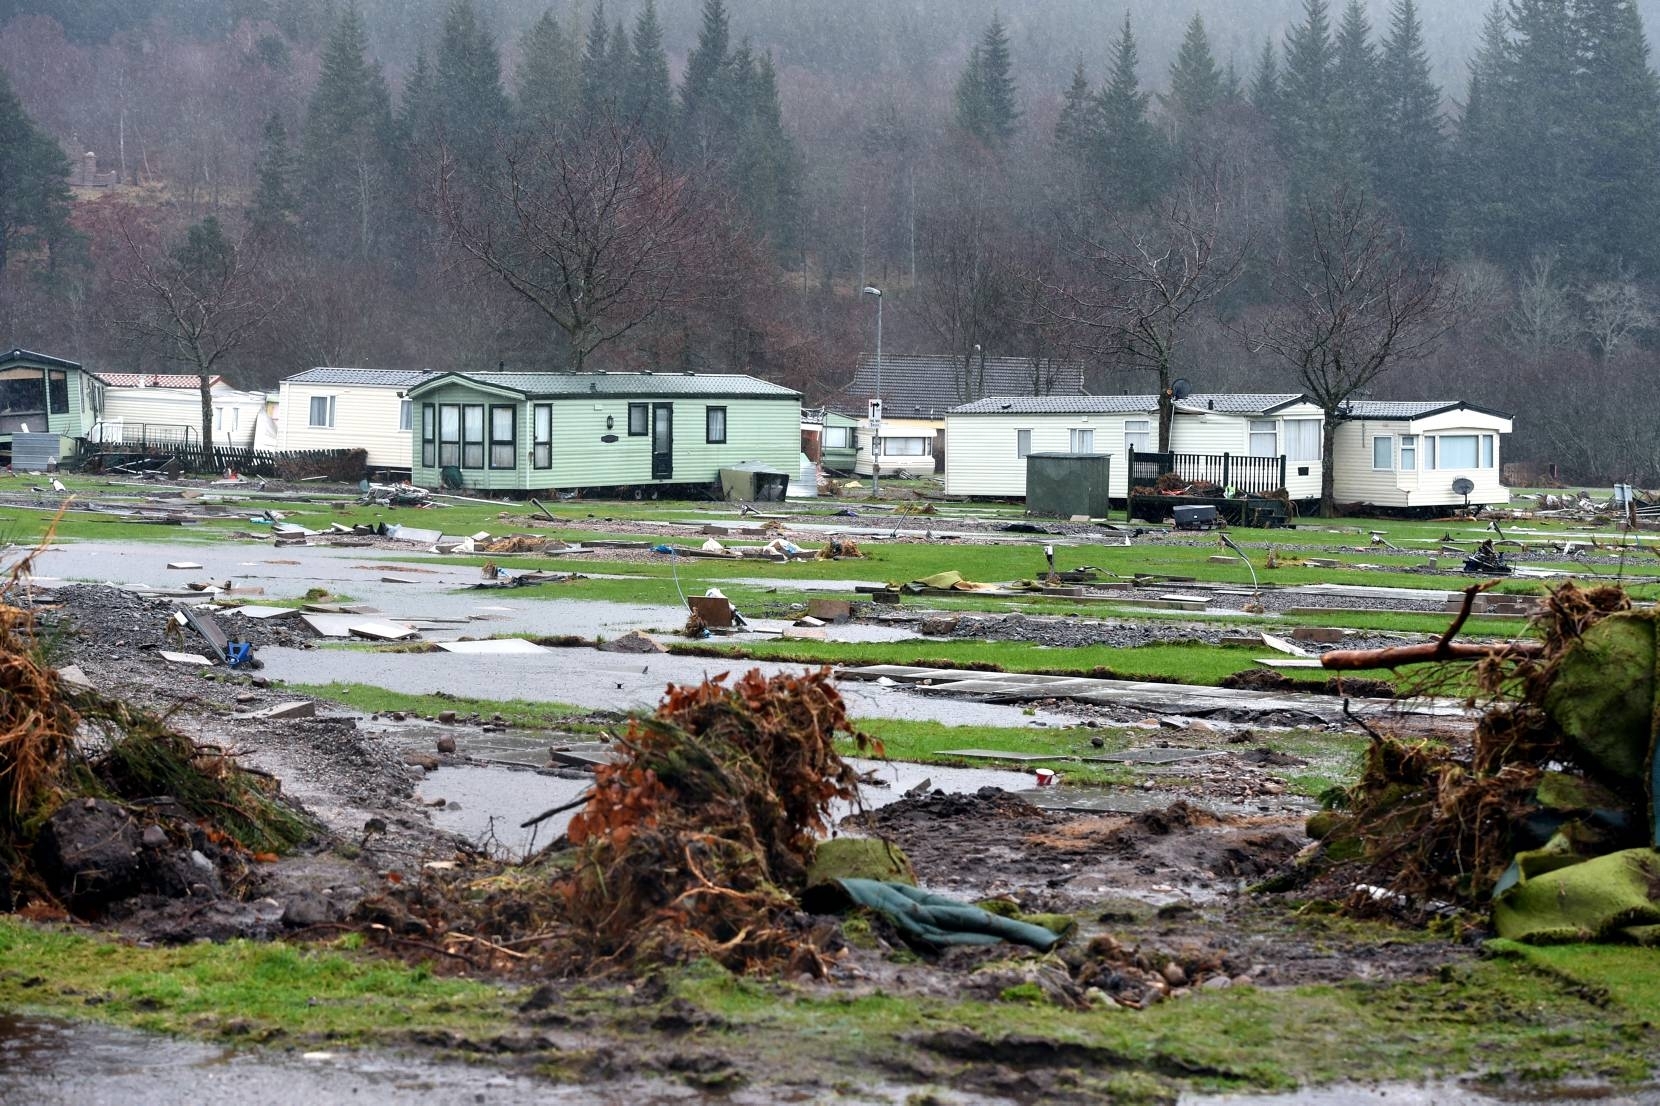 Flooding in Ballater. The caravan park. Picture by Jim Irvine 7-1-16